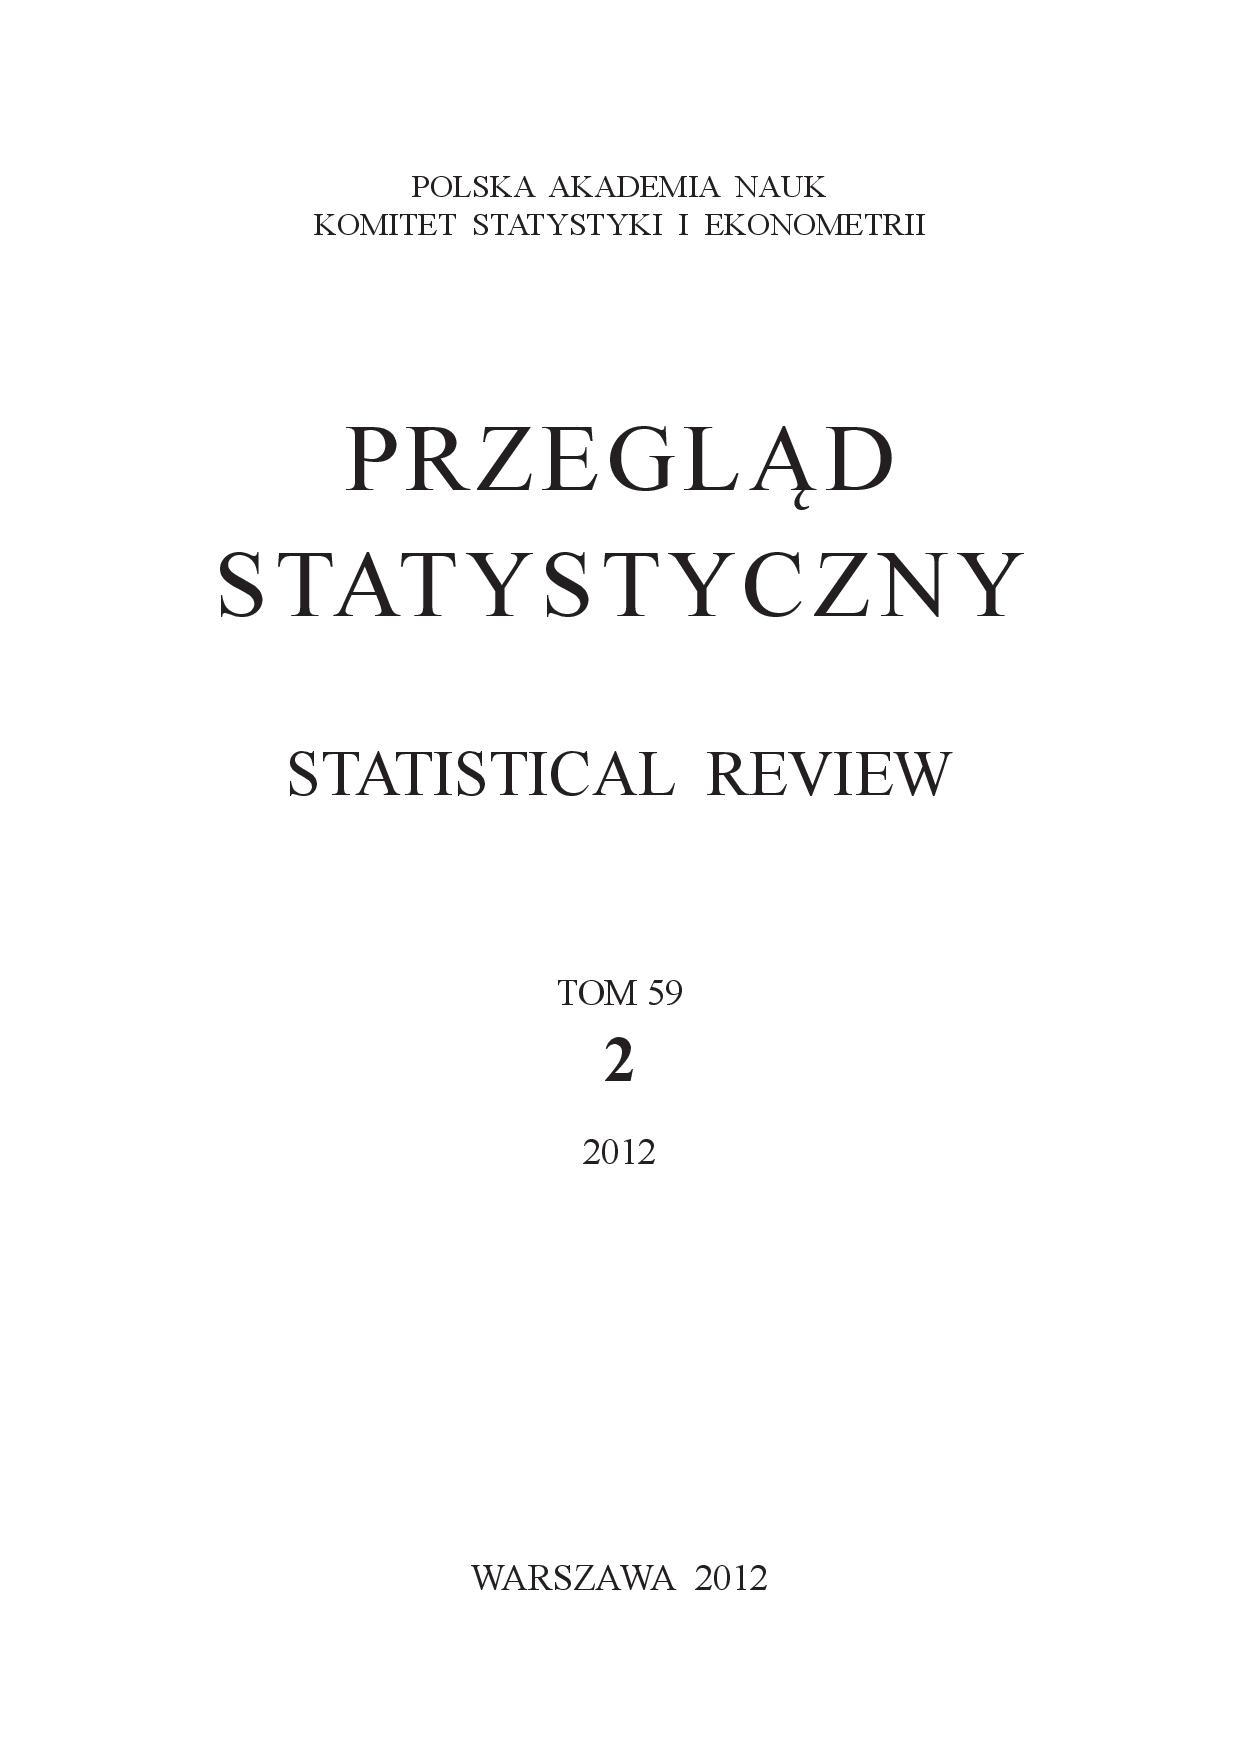 Fertility Analysis of Women in Poland Using Bayesian Poisson Regression Model Cover Image